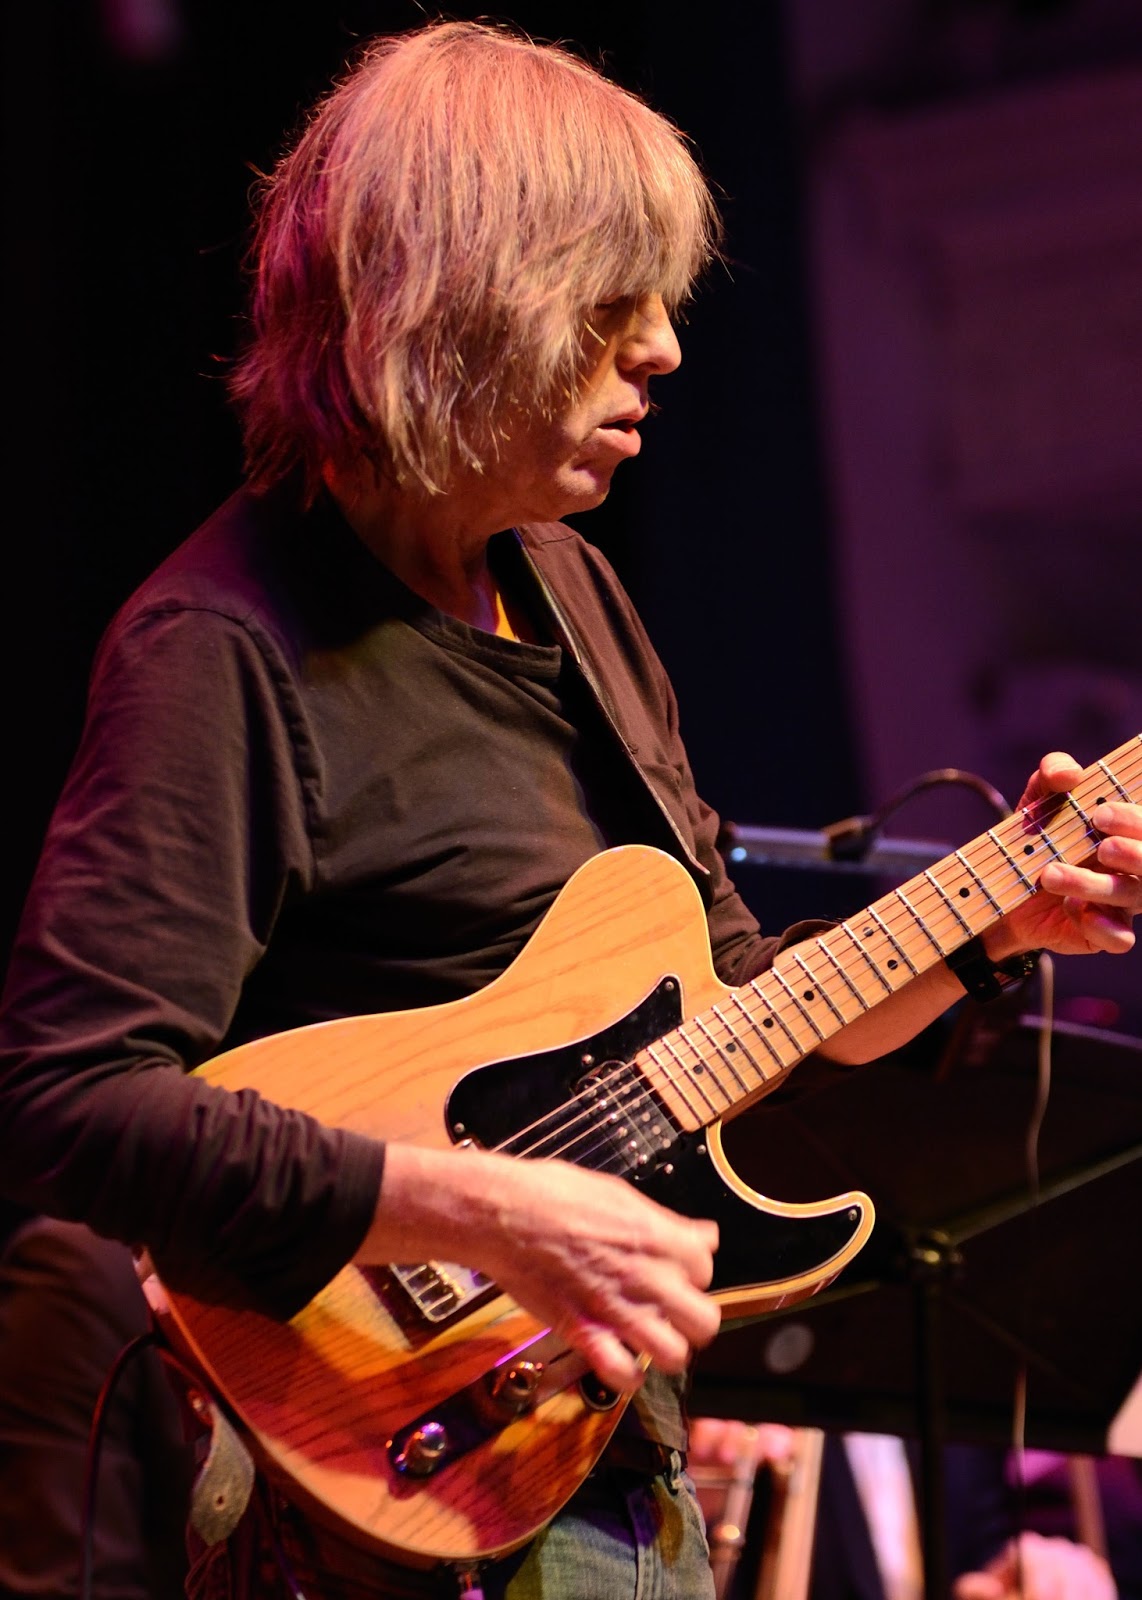 The Scottish National Jazz Orchestra Presents Mike Stern (Edynburg, Queen's Hall - 27.02.2016)